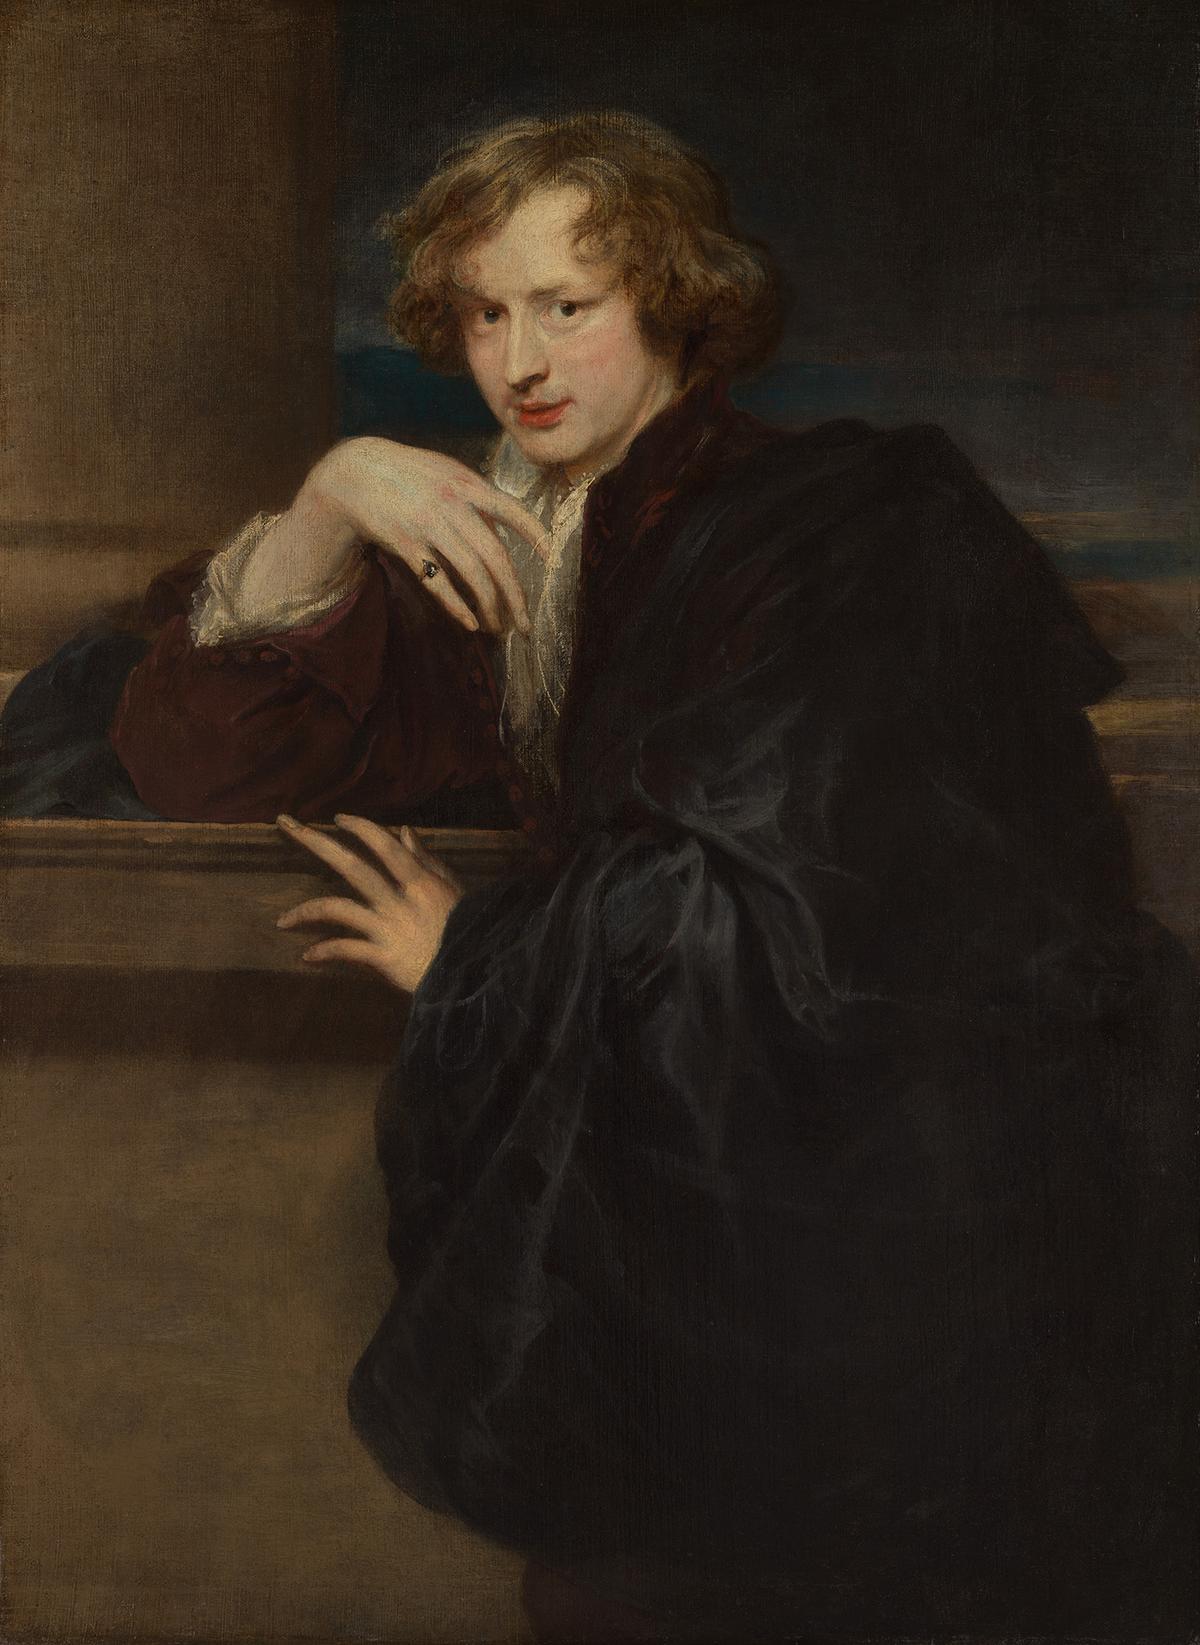 Self-Portrait, circa 1620–1621, by Anthony van Dyck. Oil on canvas; 47 1/8 inches by 34 5/8 inches. The Metropolitan Museum of Art, New York City. (Public Domain)